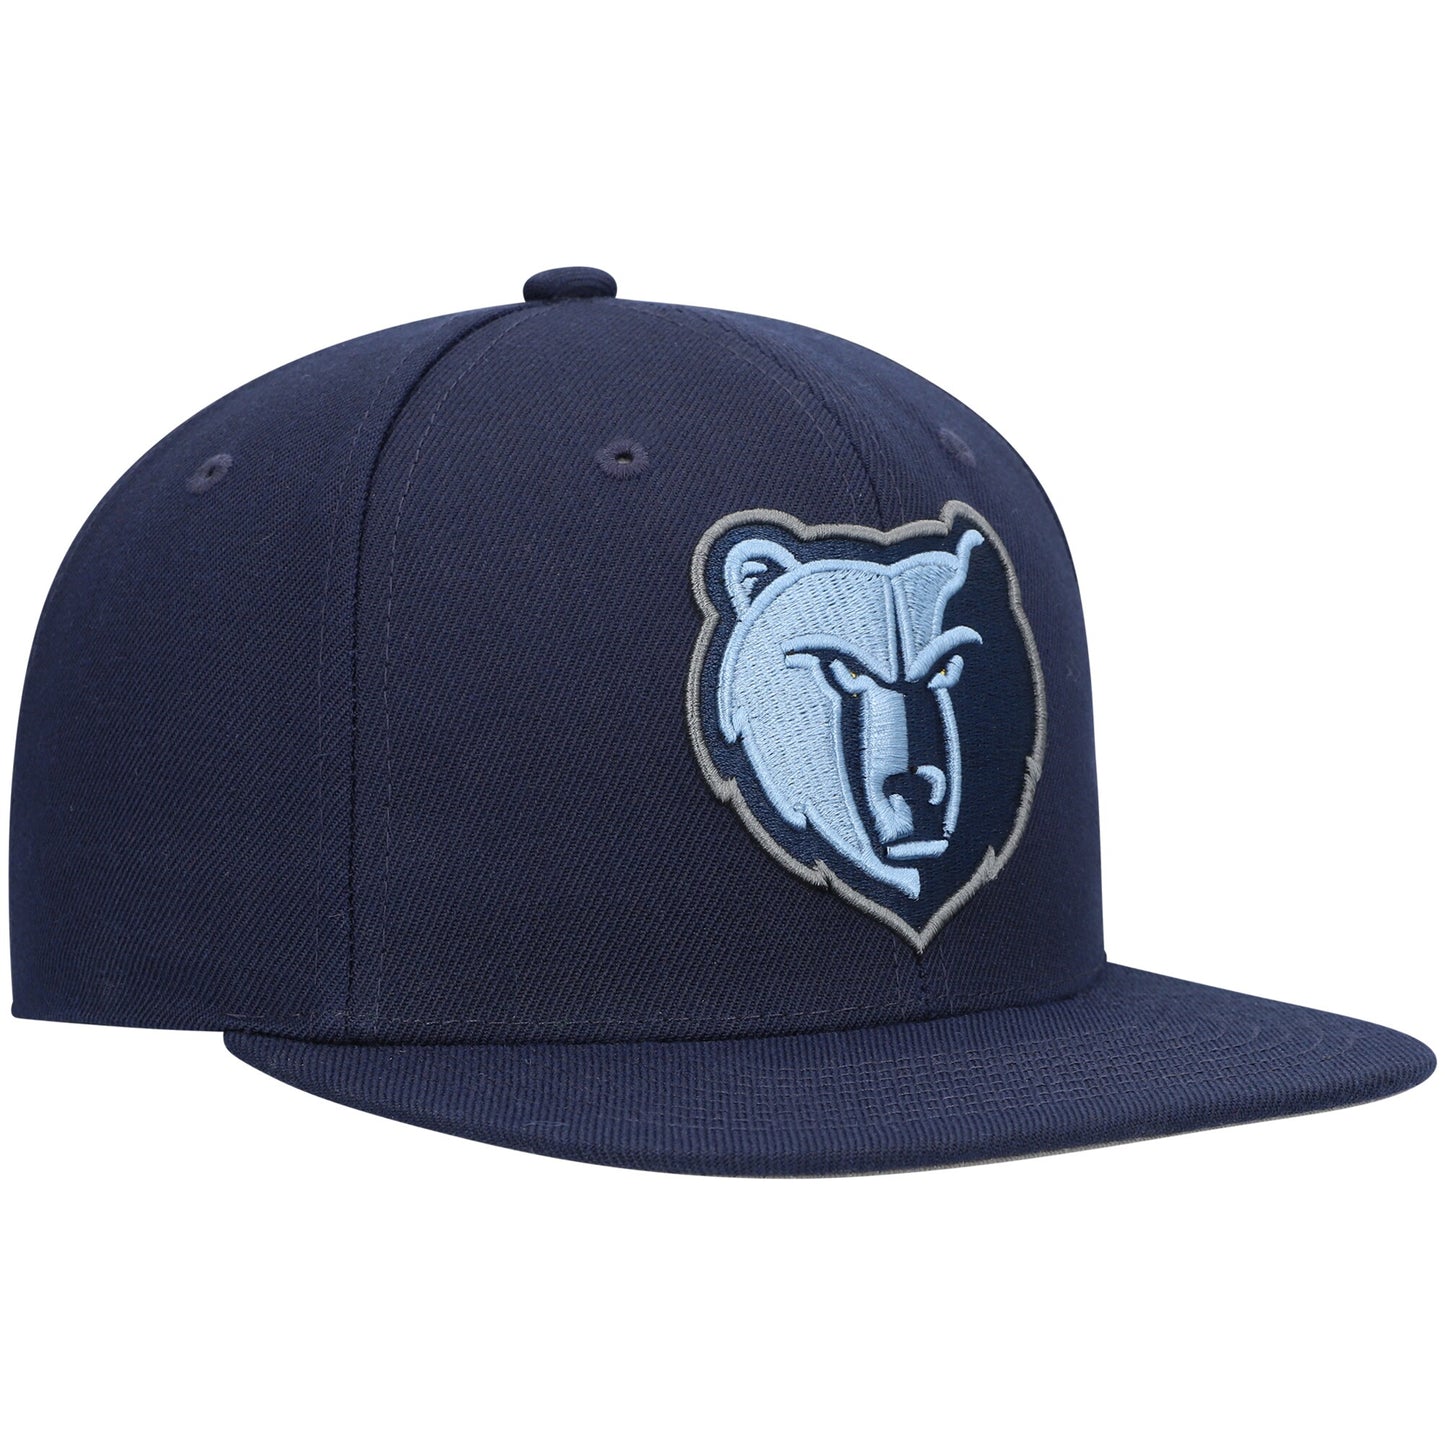 Mens NBA Memphis Grizzlies Navy Team Ground 2.0 Snapback Hat By Mitchell And Ness